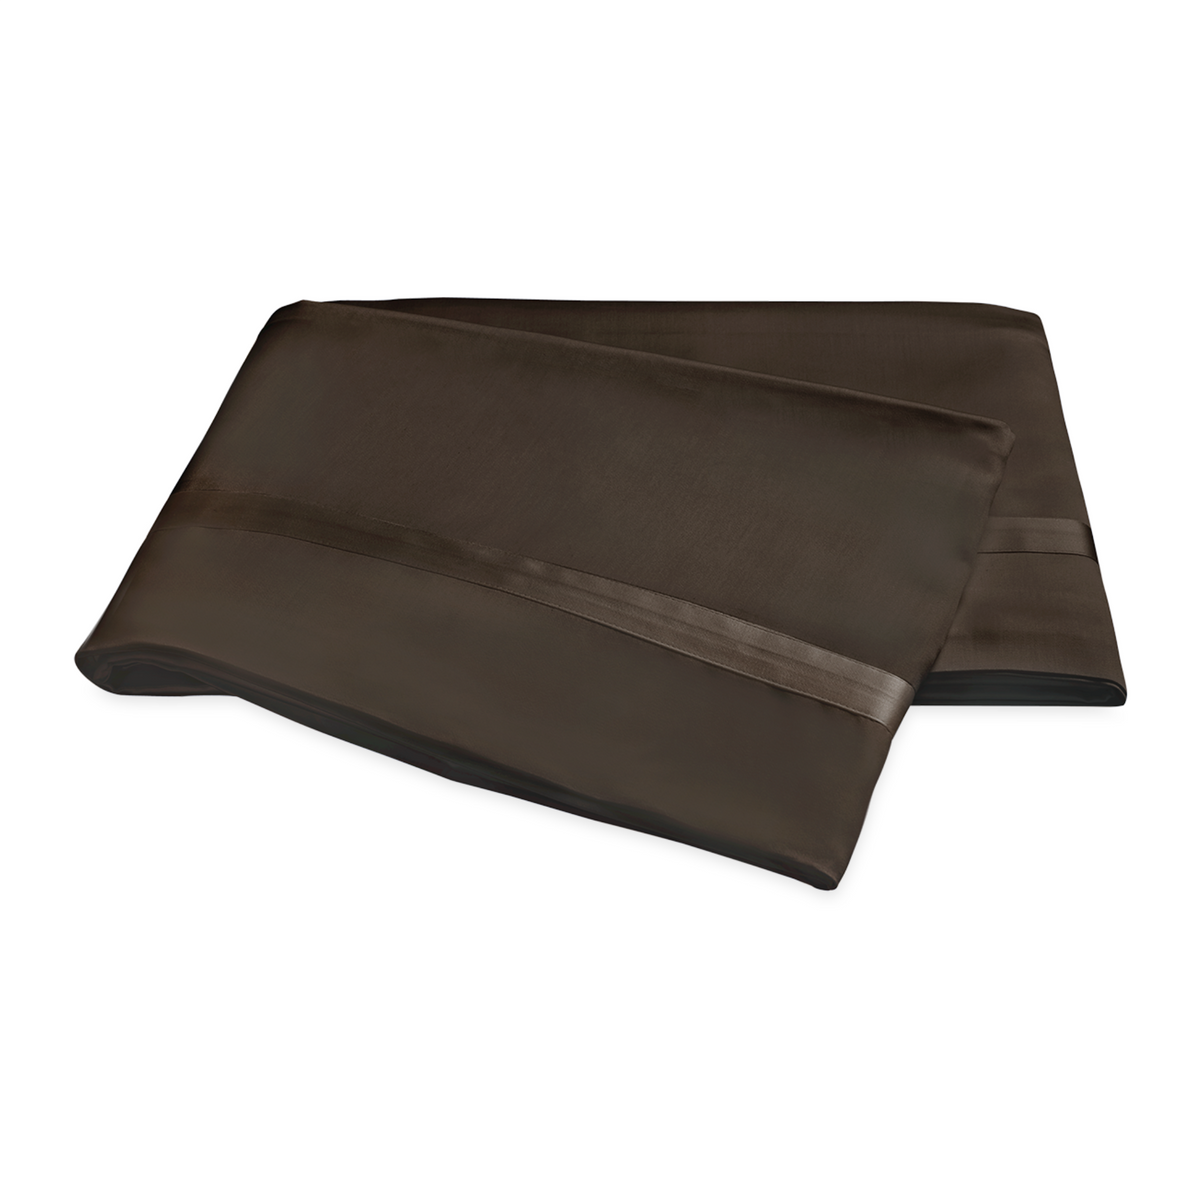 Folded Flat Sheet of Matouk Nocturne Bedding in Sable Color